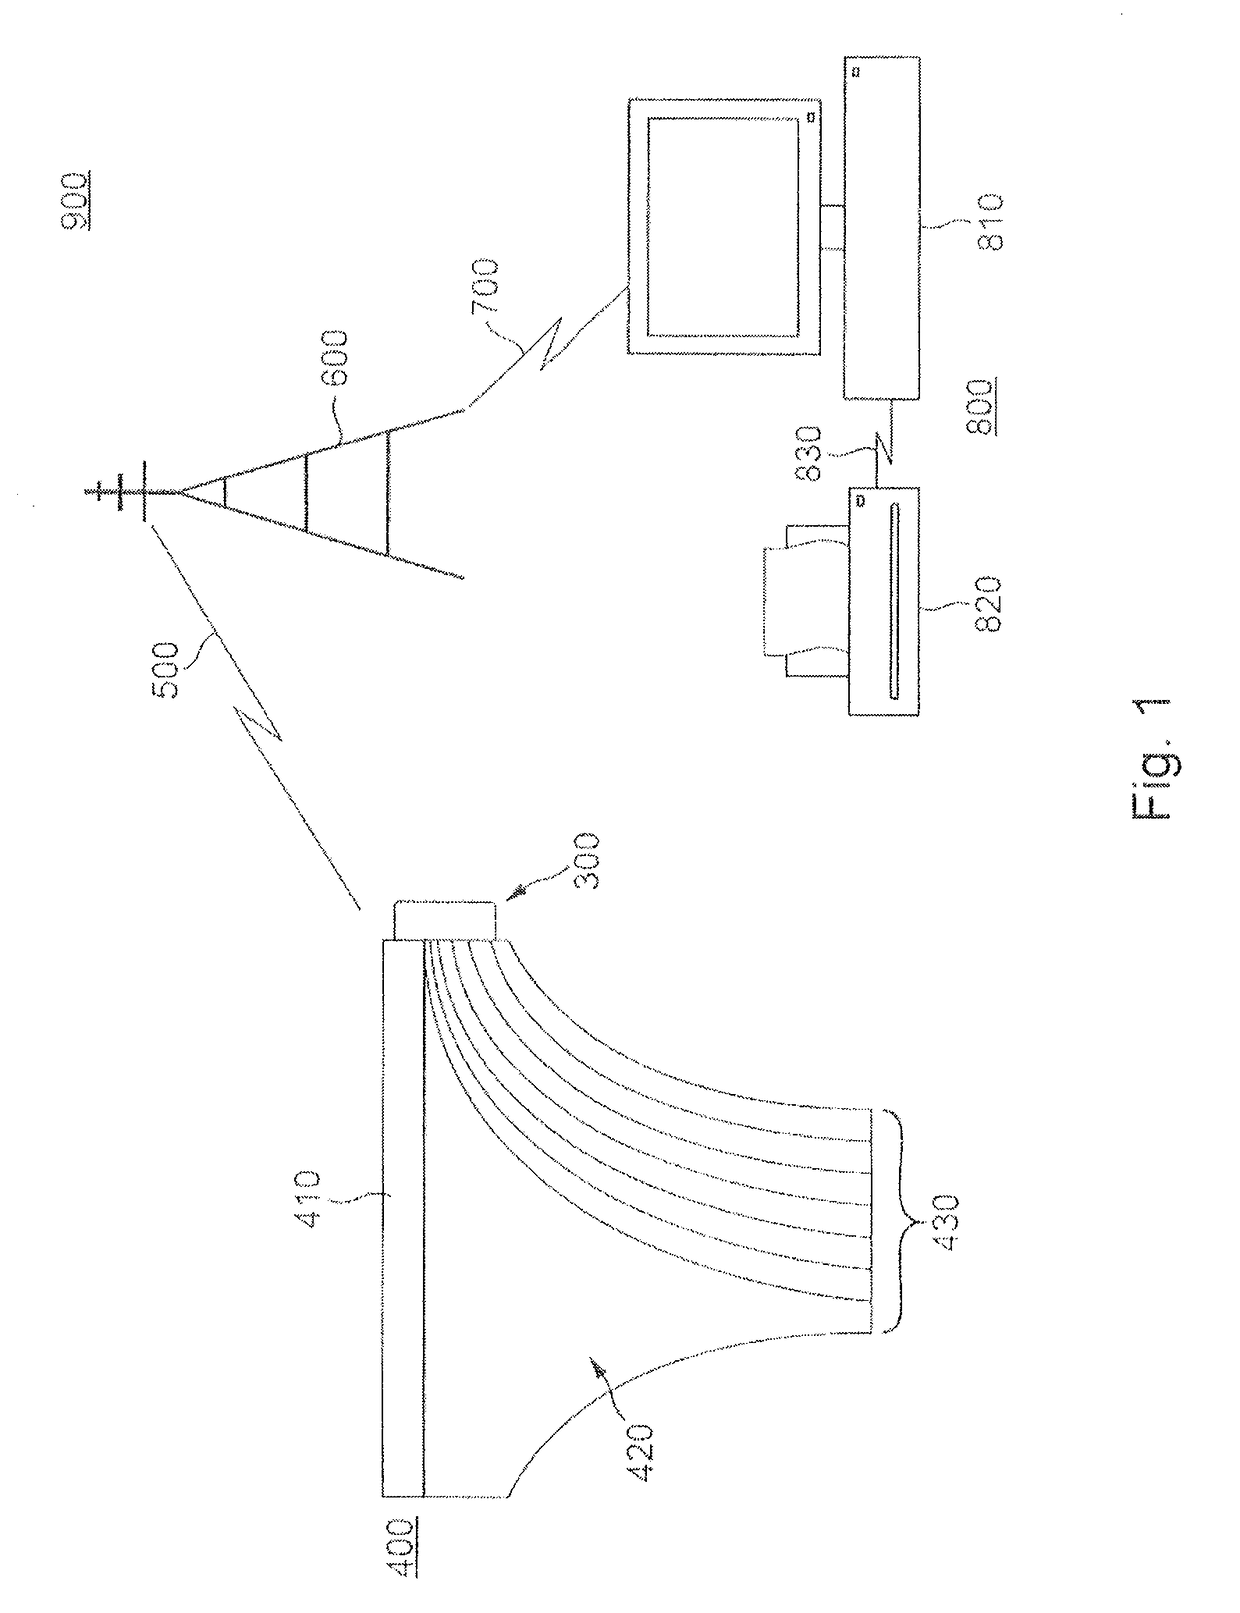 Monitoring and displaying an absorption state of an absorbent article